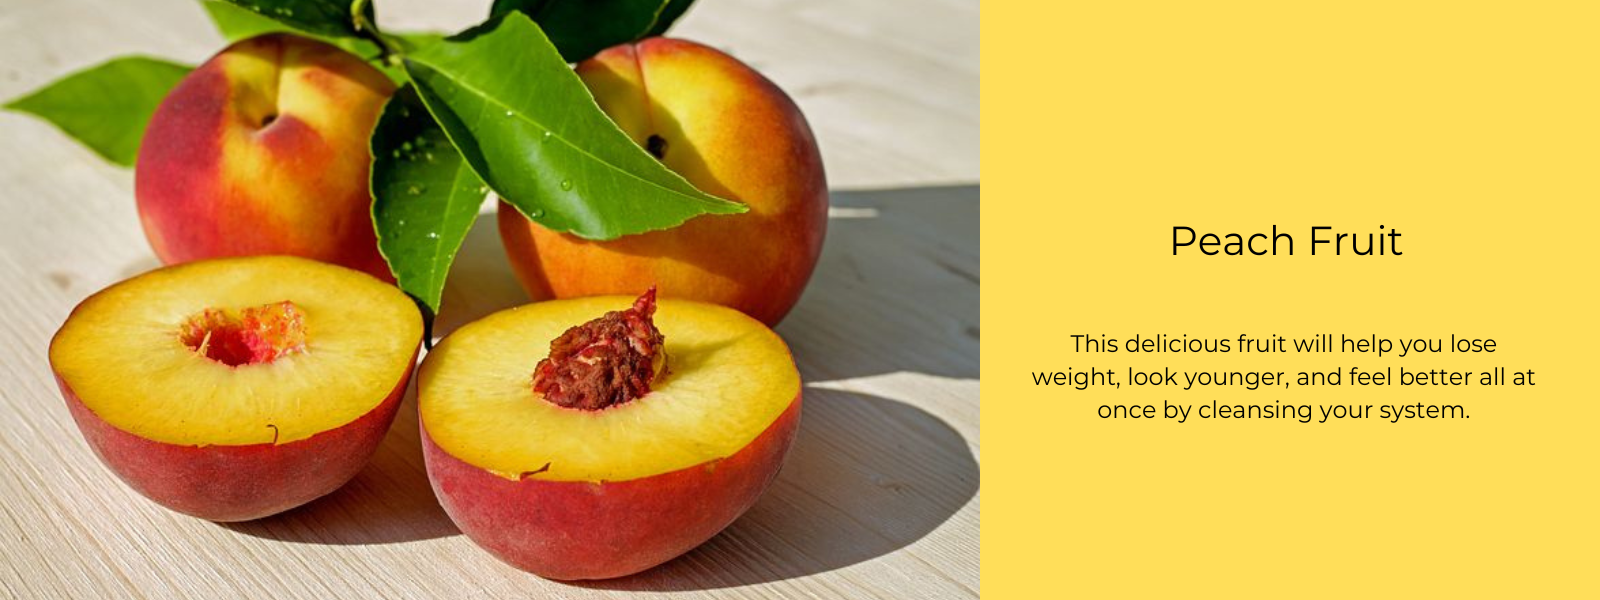 Peach Fruit - Health Benefits, Uses and Important Facts